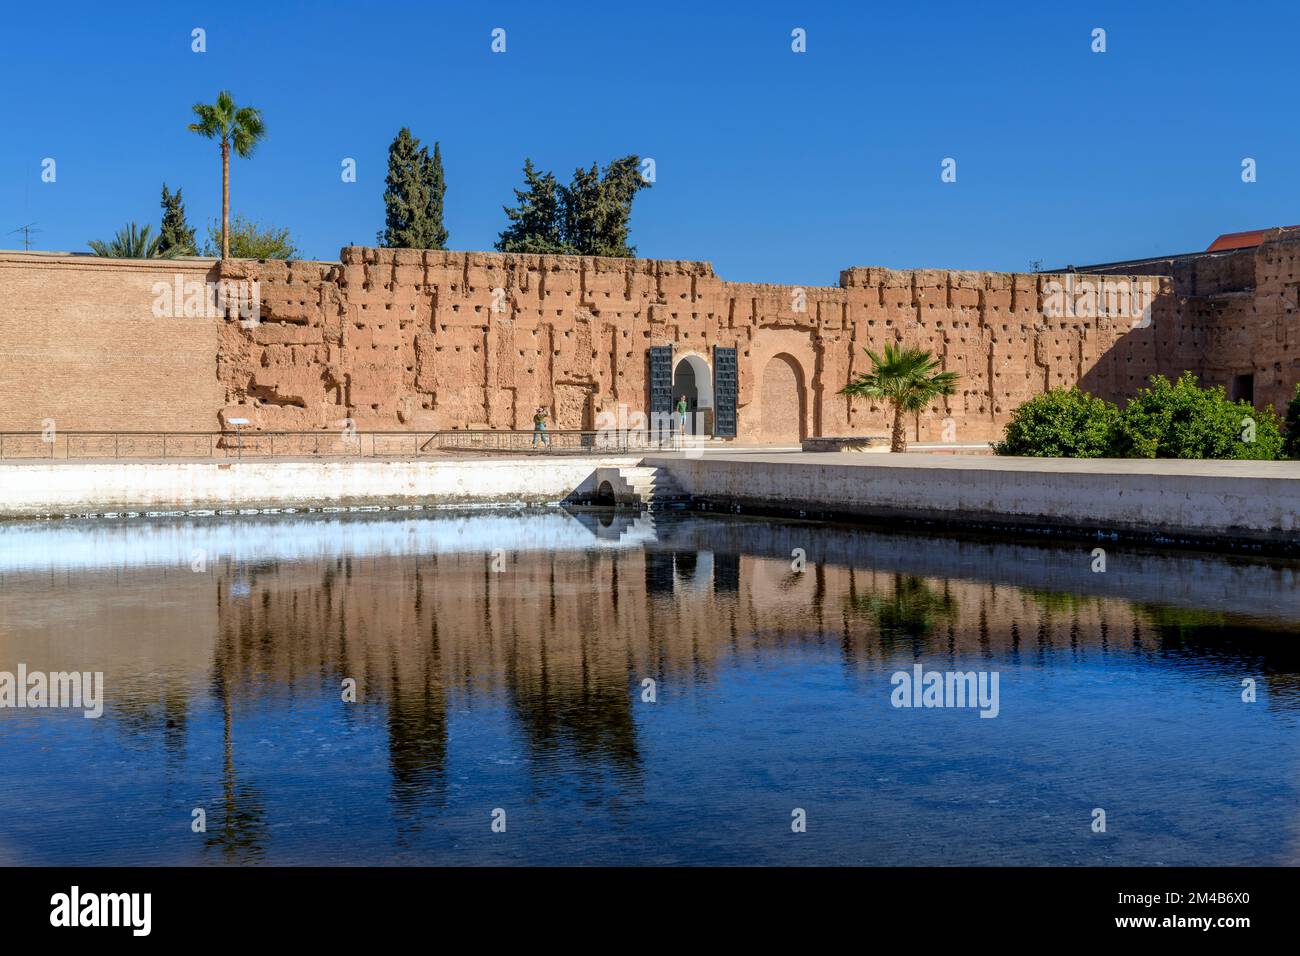 Badi Palace, Marrakesh, Morocco. Built for sultan Ahmad al-Mansur. After his death, it fell into ruin. Valuable materials were then taken and reused. Stock Photo